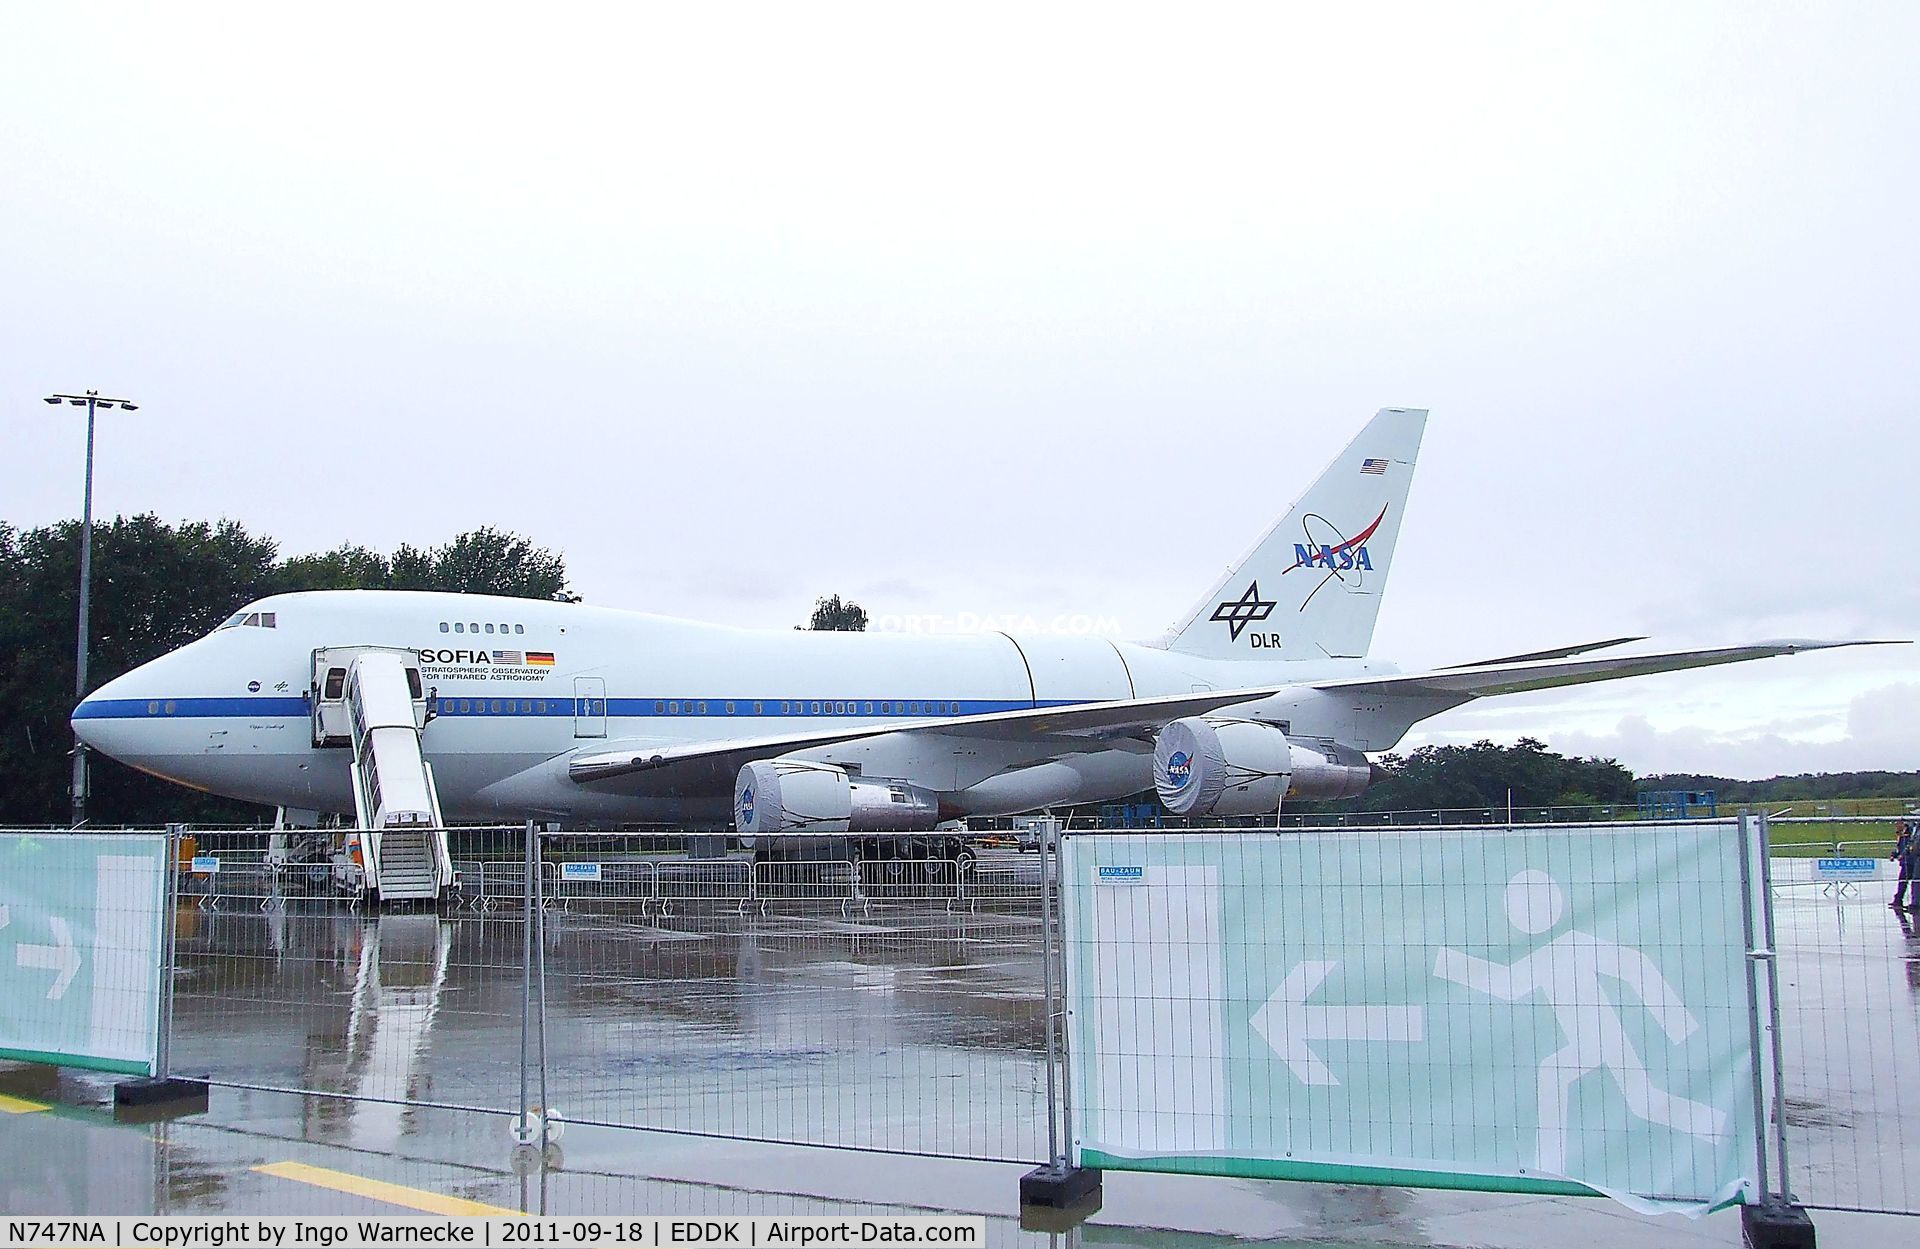 N747NA, 1977 Boeing 747SP-21 C/N 21441, Boeing / NASA / DLR 747SP-21 SOFIA flying observatory research aircraft at the DLR 2011 air and space day on the side of Cologne airport